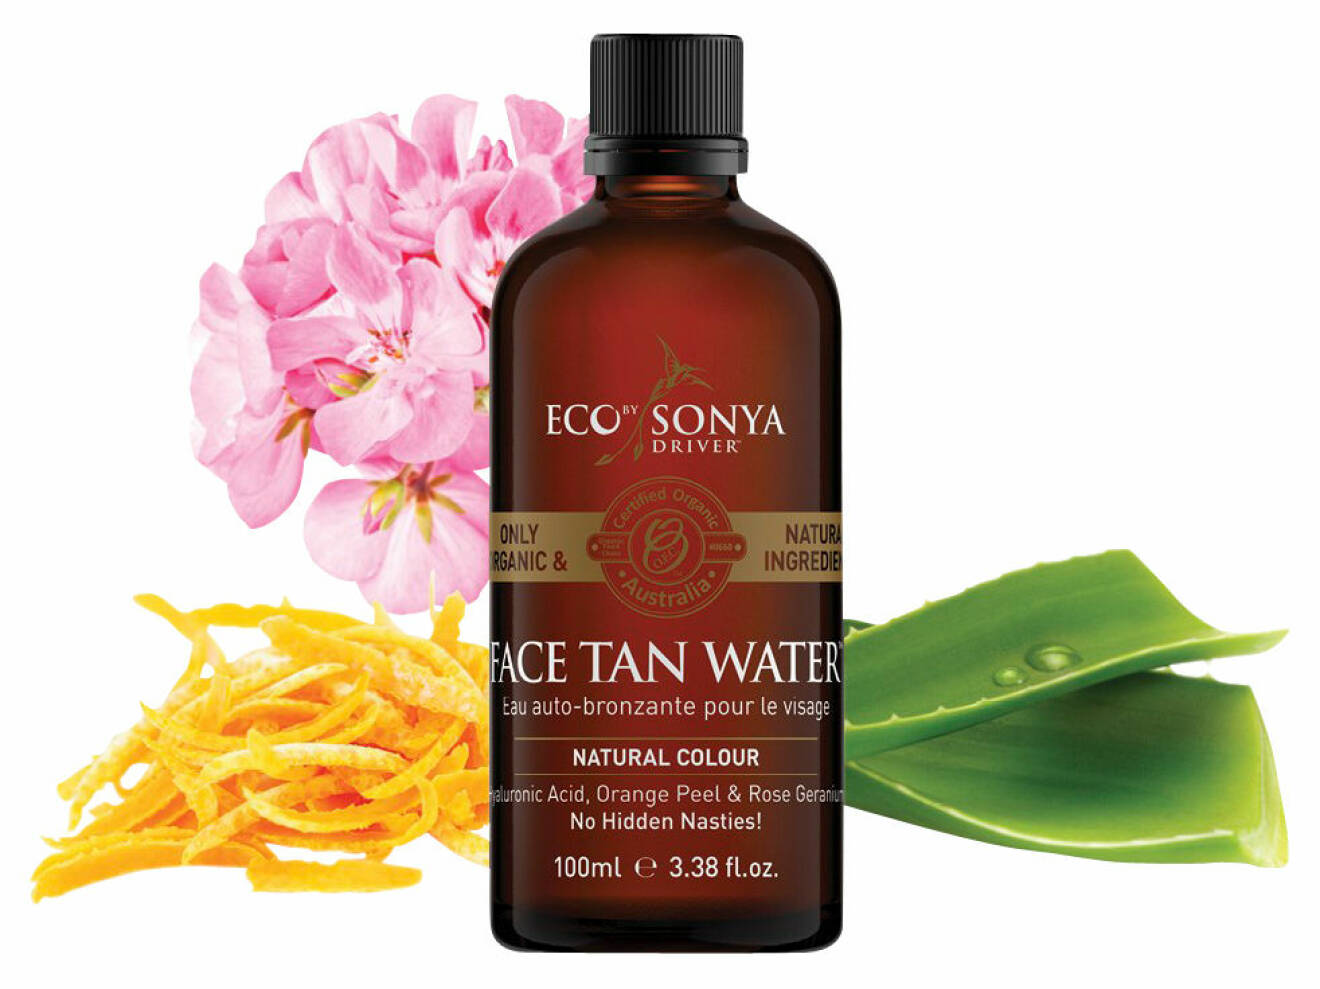 Eco by Sonya, Face tan water.